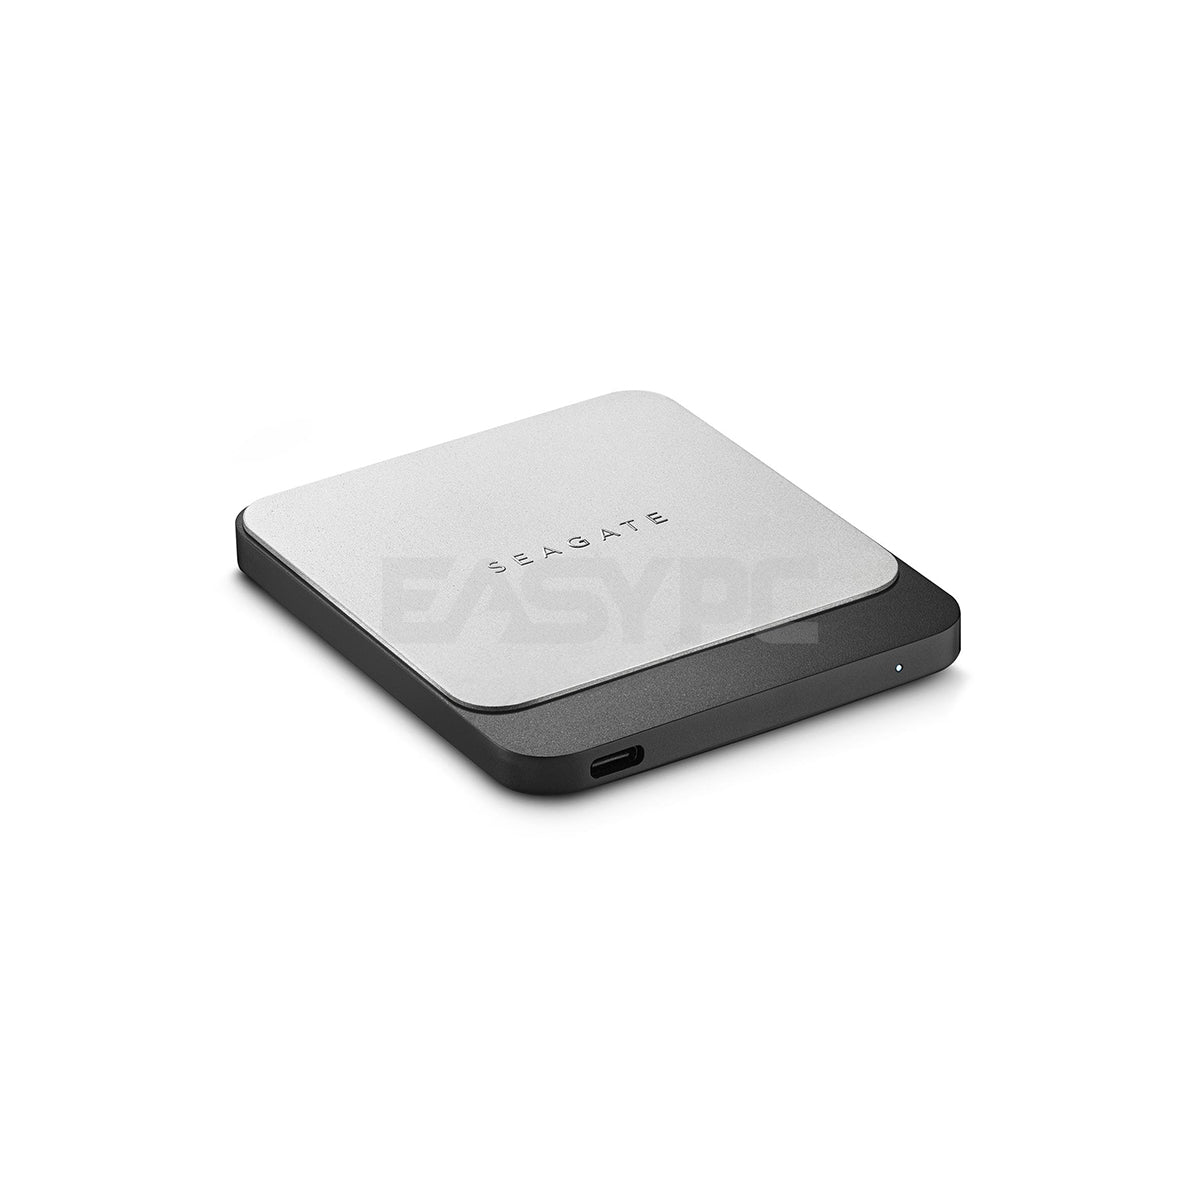  Seagate 500 GB Fast SSD Portable External Solid State